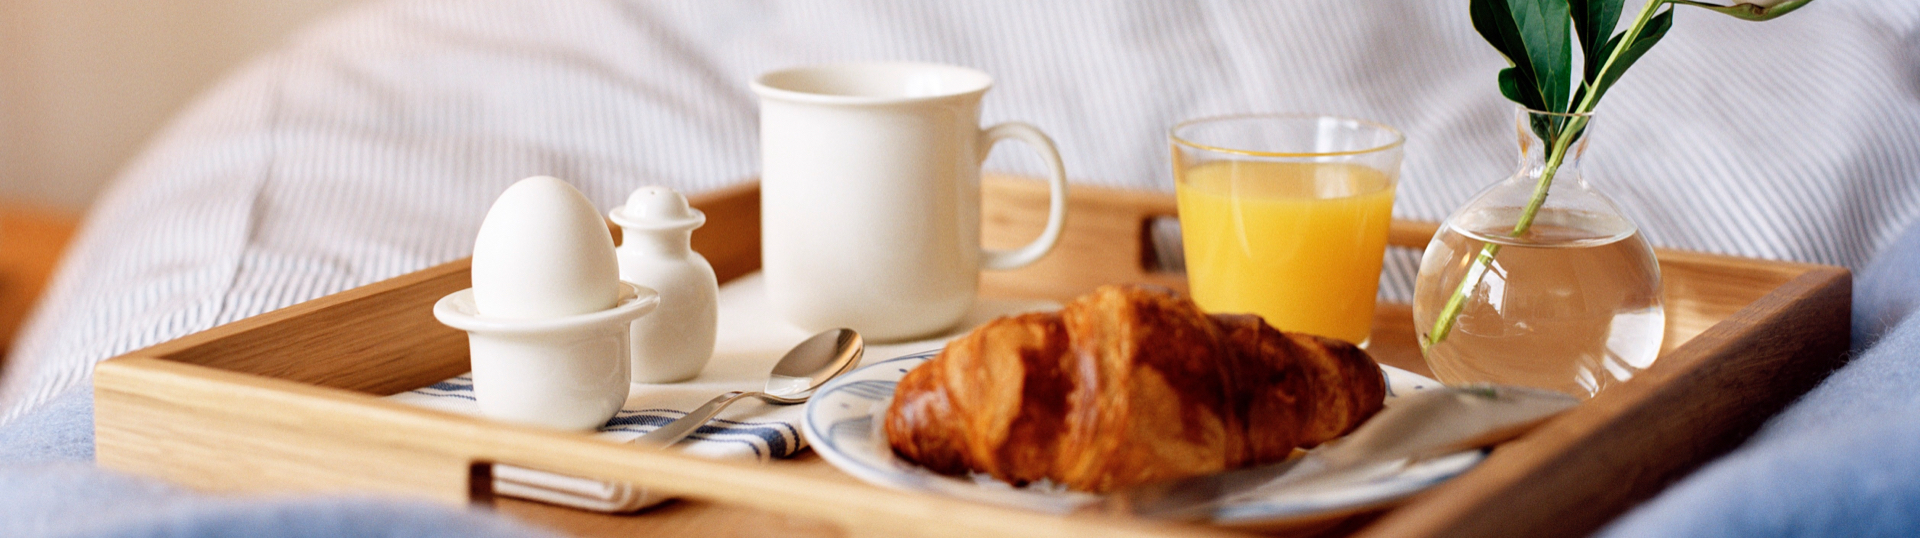 breakfast with coffee orange juice and a croissant